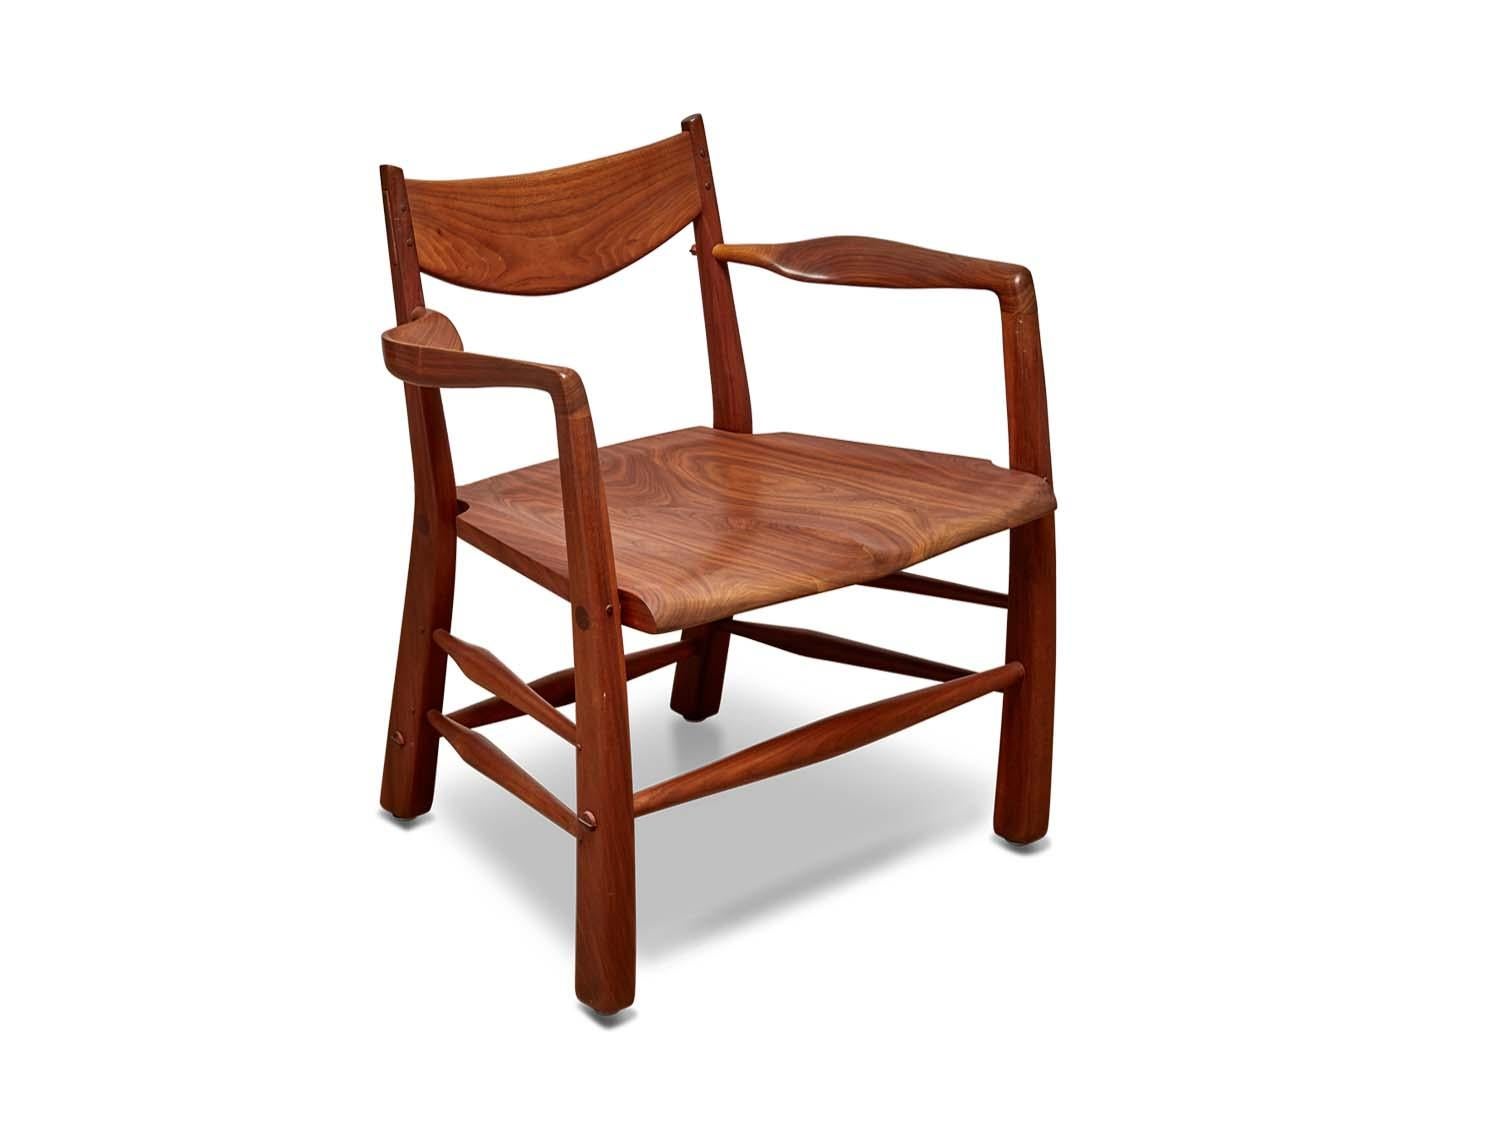 American Pair of Sculptural Walnut Chairs by Richard Patterson